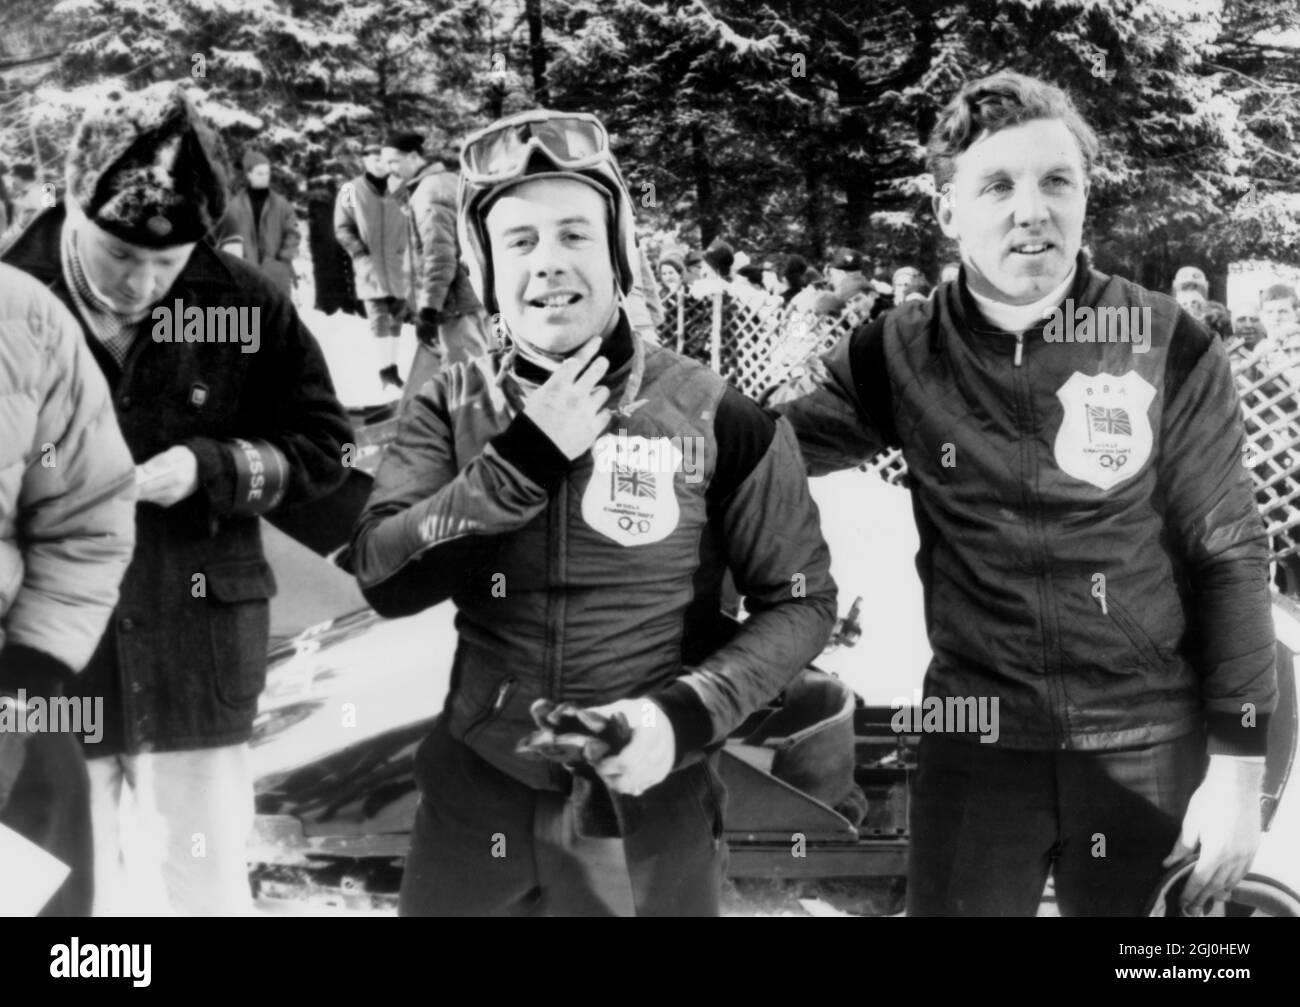 1964 Winter Olympic Games - Innsbruck, Austria Britain's gold medal winners at the ninth Winter Olympic Games, Tony Nash (left) the pilot, and Robin Dixon, pictured after winning the first two runs in the two-man bob at Igls, near Innsbruck, 31st January. On Saturday the British pair won the second two runs to become Britain's first Winter Olympic Gold Medal winners since Jeanette Altwegg won the women's figure skating in 1952. The total time Nash and Dixon took for their four runs over the 1,506 metre course was four minutes 21.9 seconds. - 31 January 1964 - ©TopFoto Stock Photo